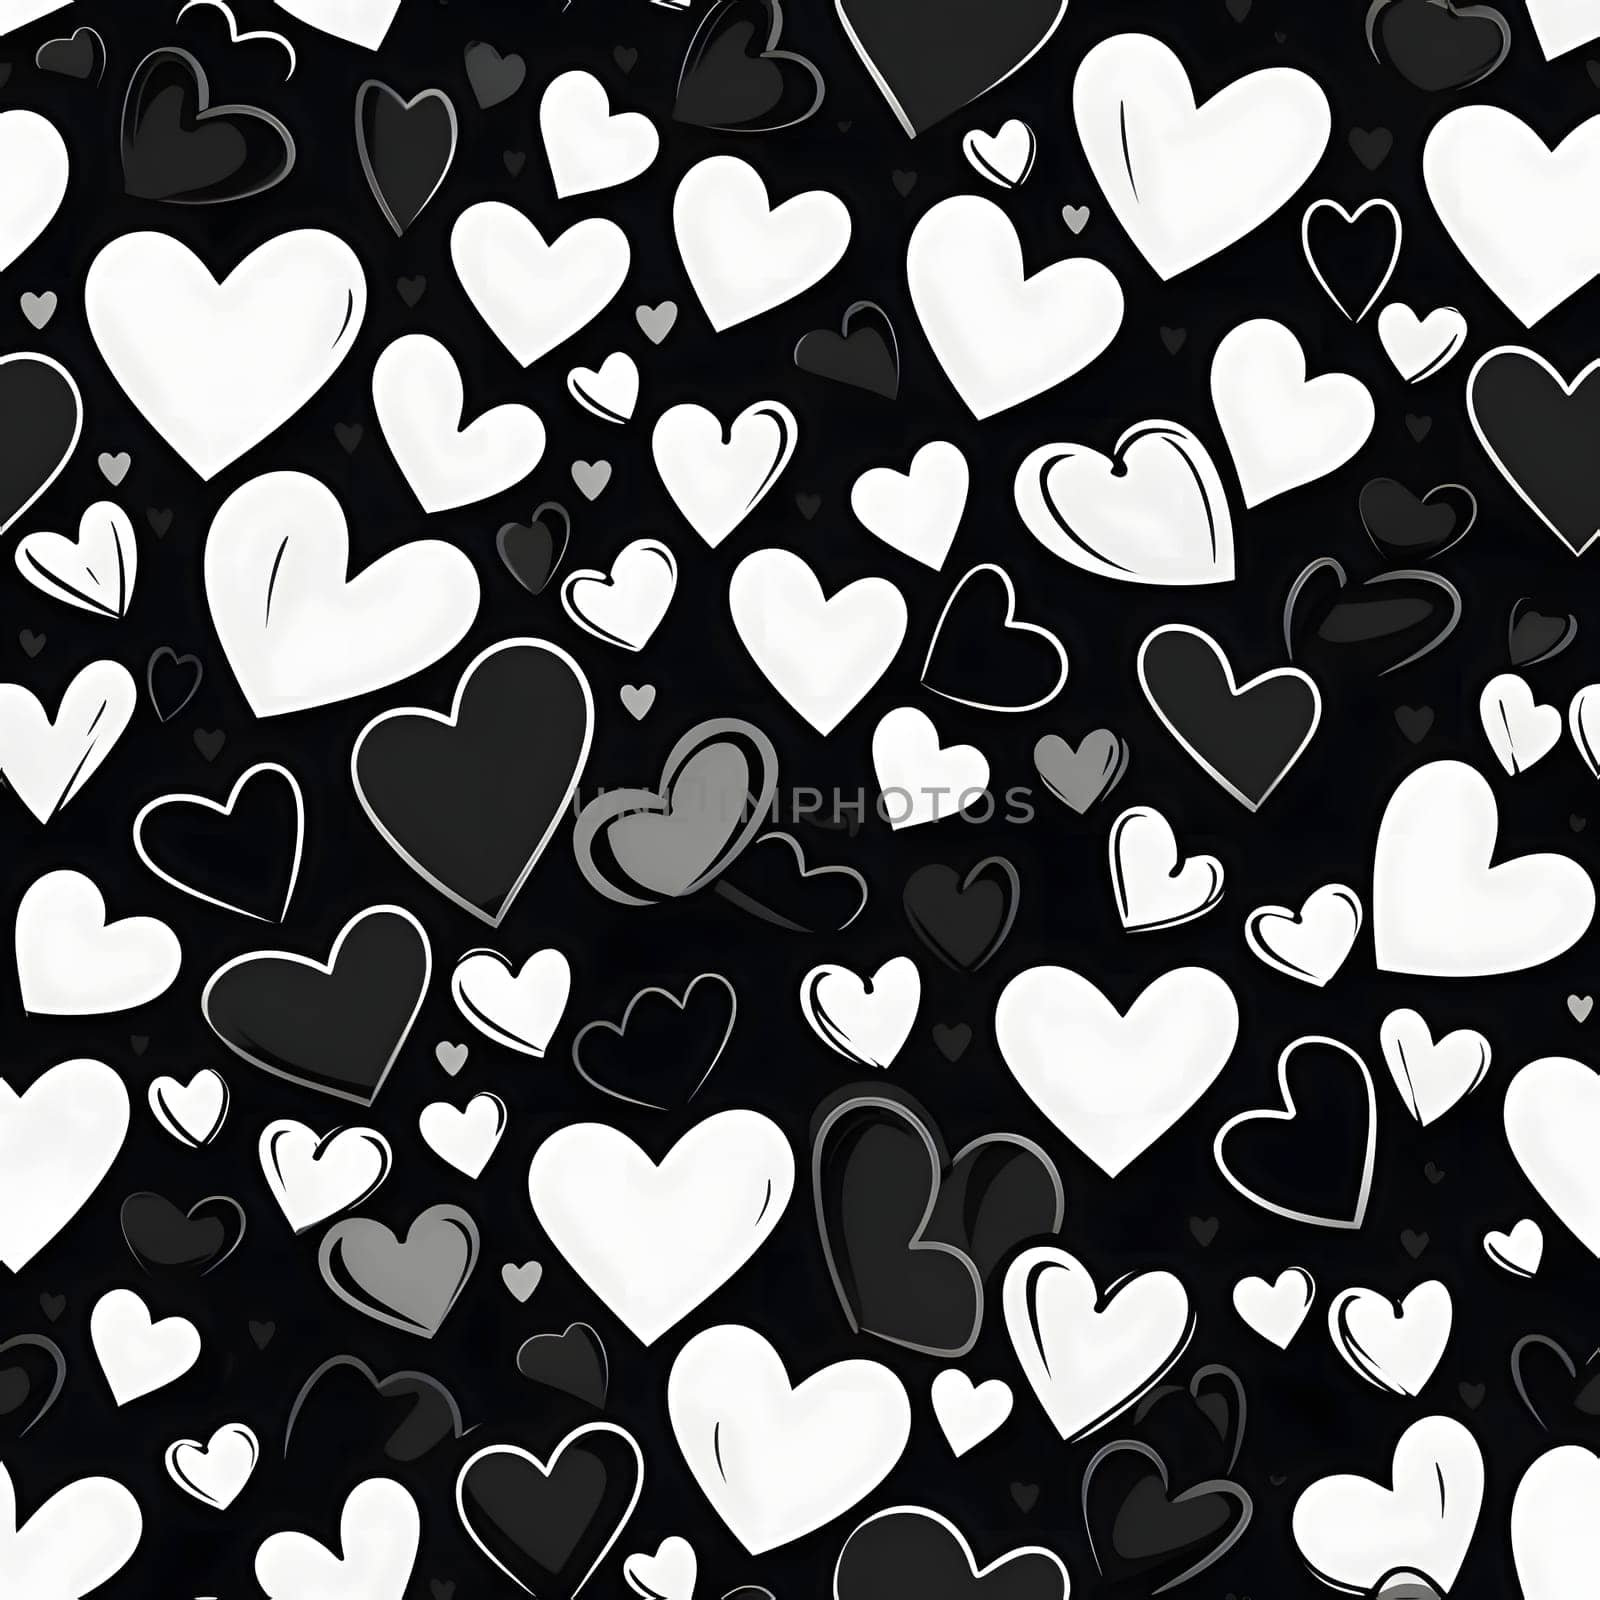 Elegant and modern. Black and white hearts as abstract background, wallpaper, banner, texture design with pattern - vector.